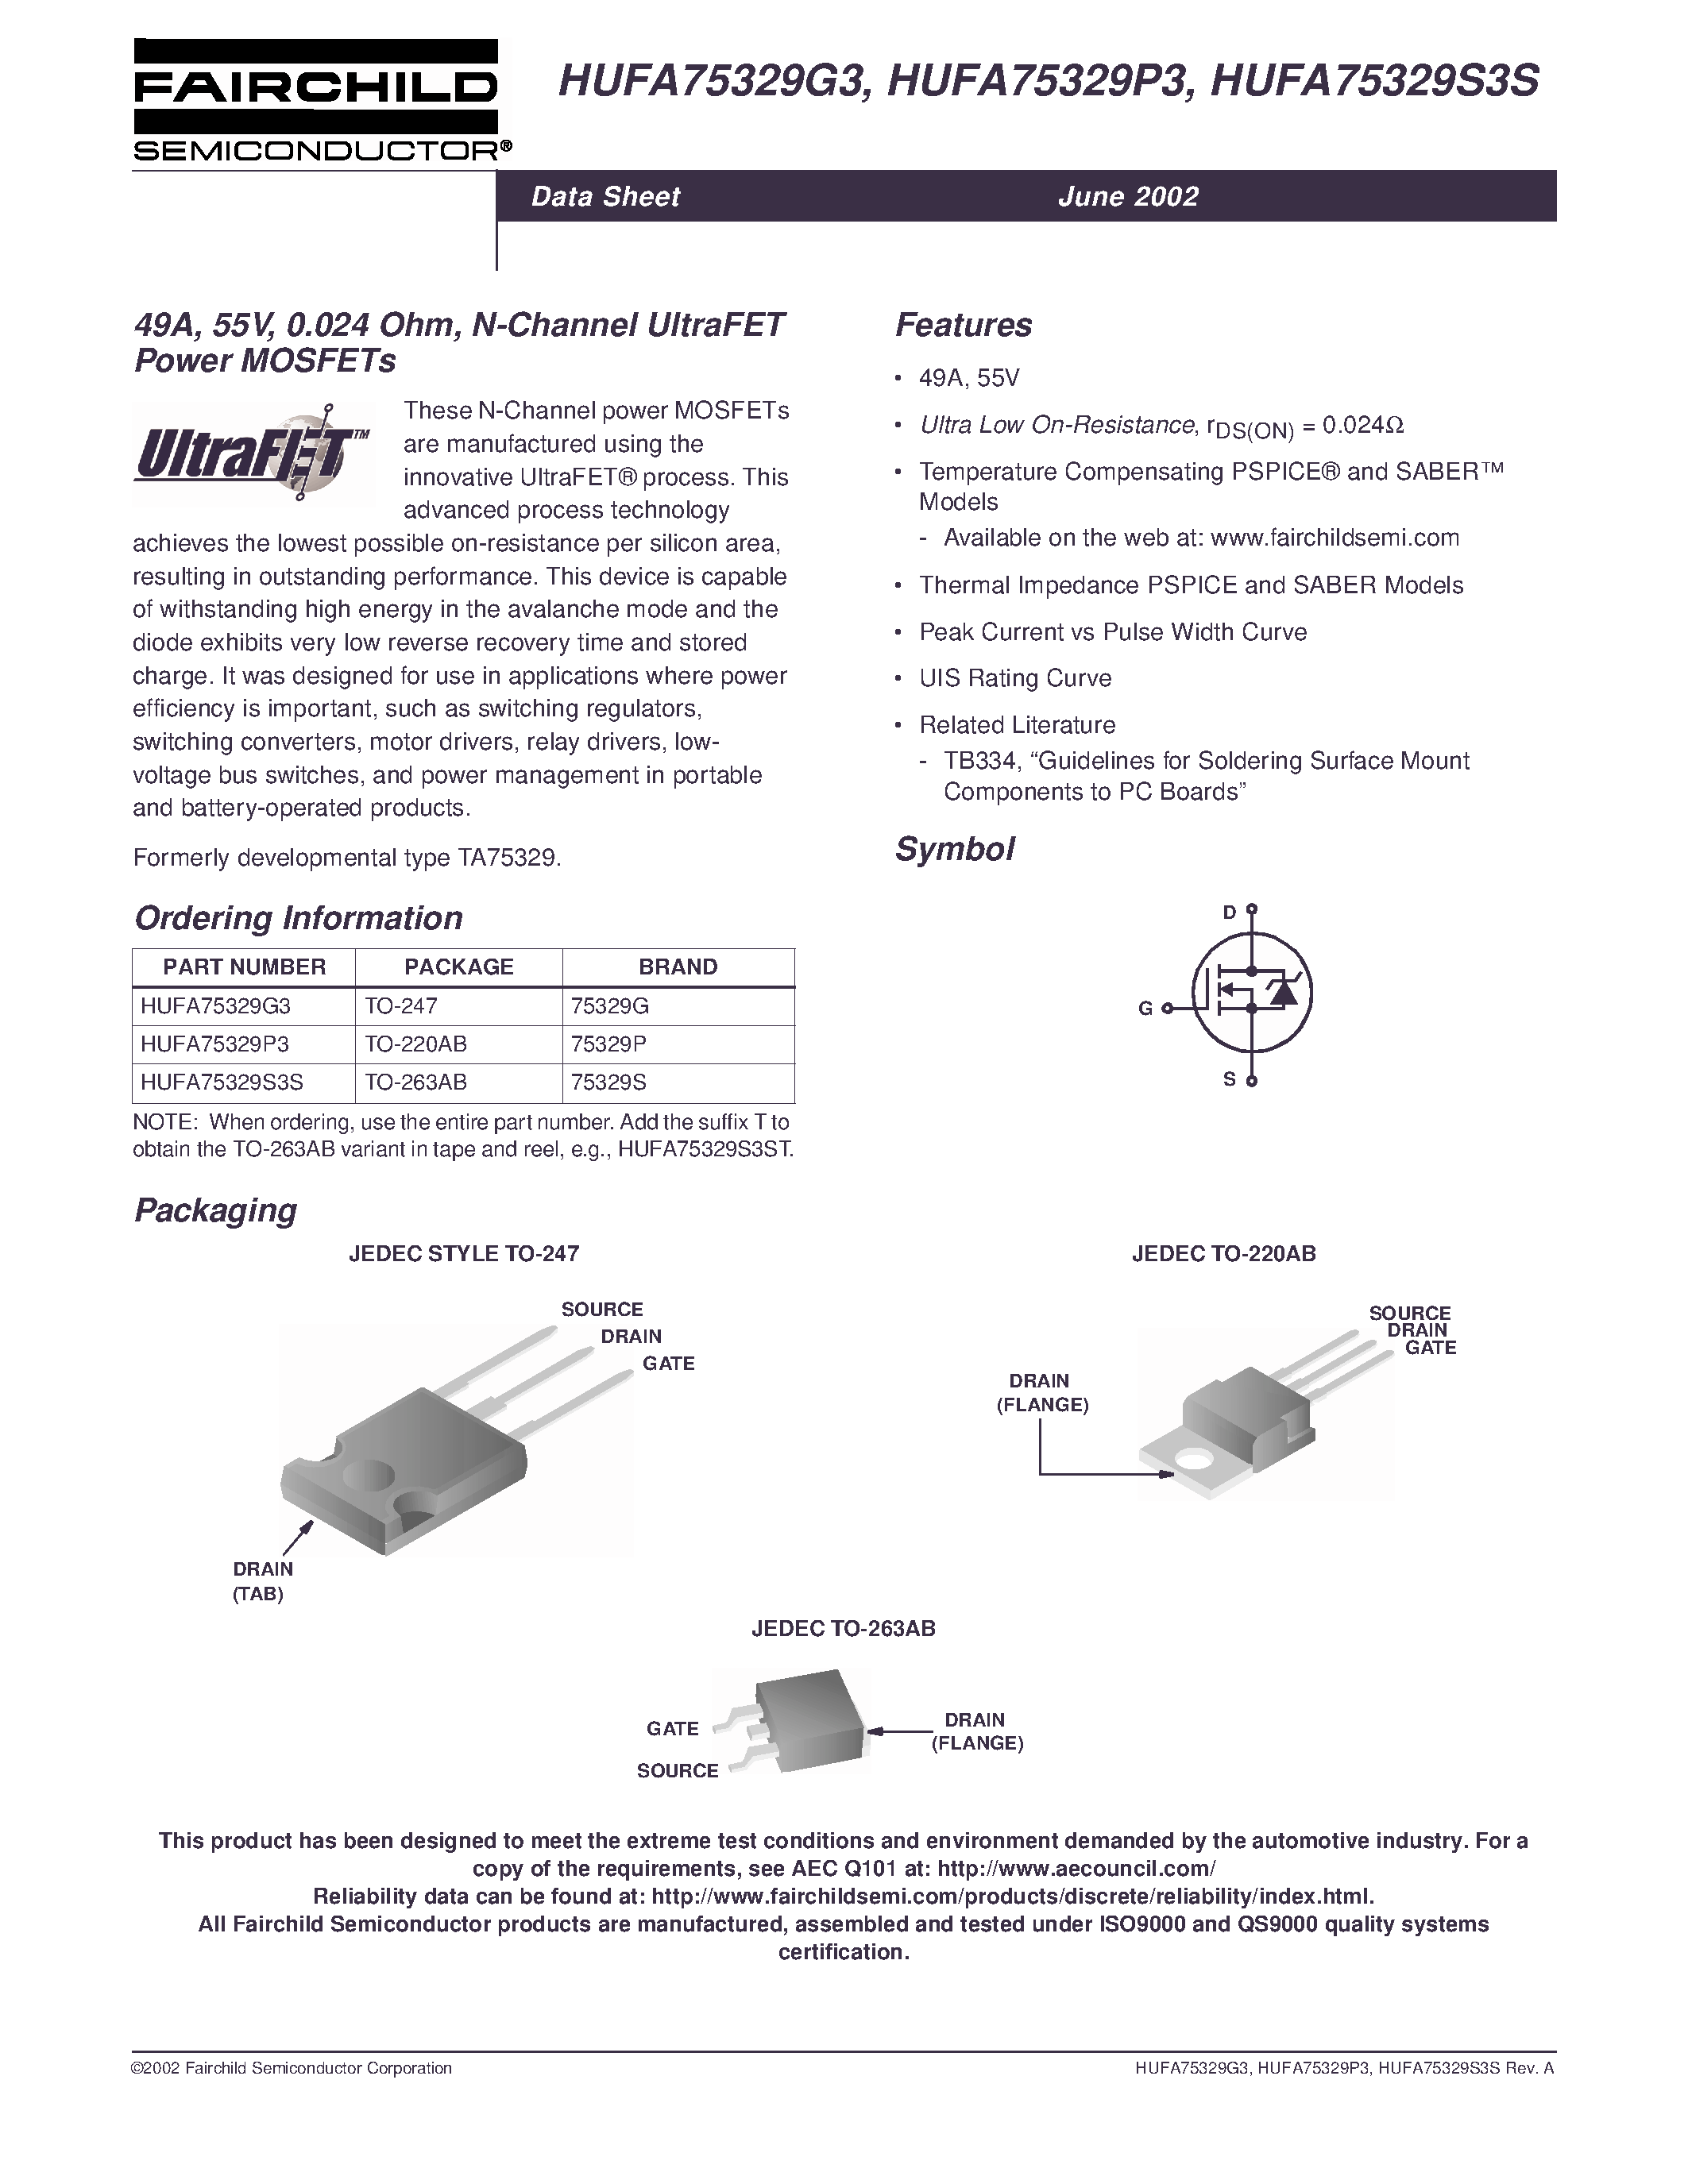 Даташит HUFA75329D3S - 20A/ 55V/ 0.026 Ohm/ N-Channel UltraFET Power MOSFETs страница 1